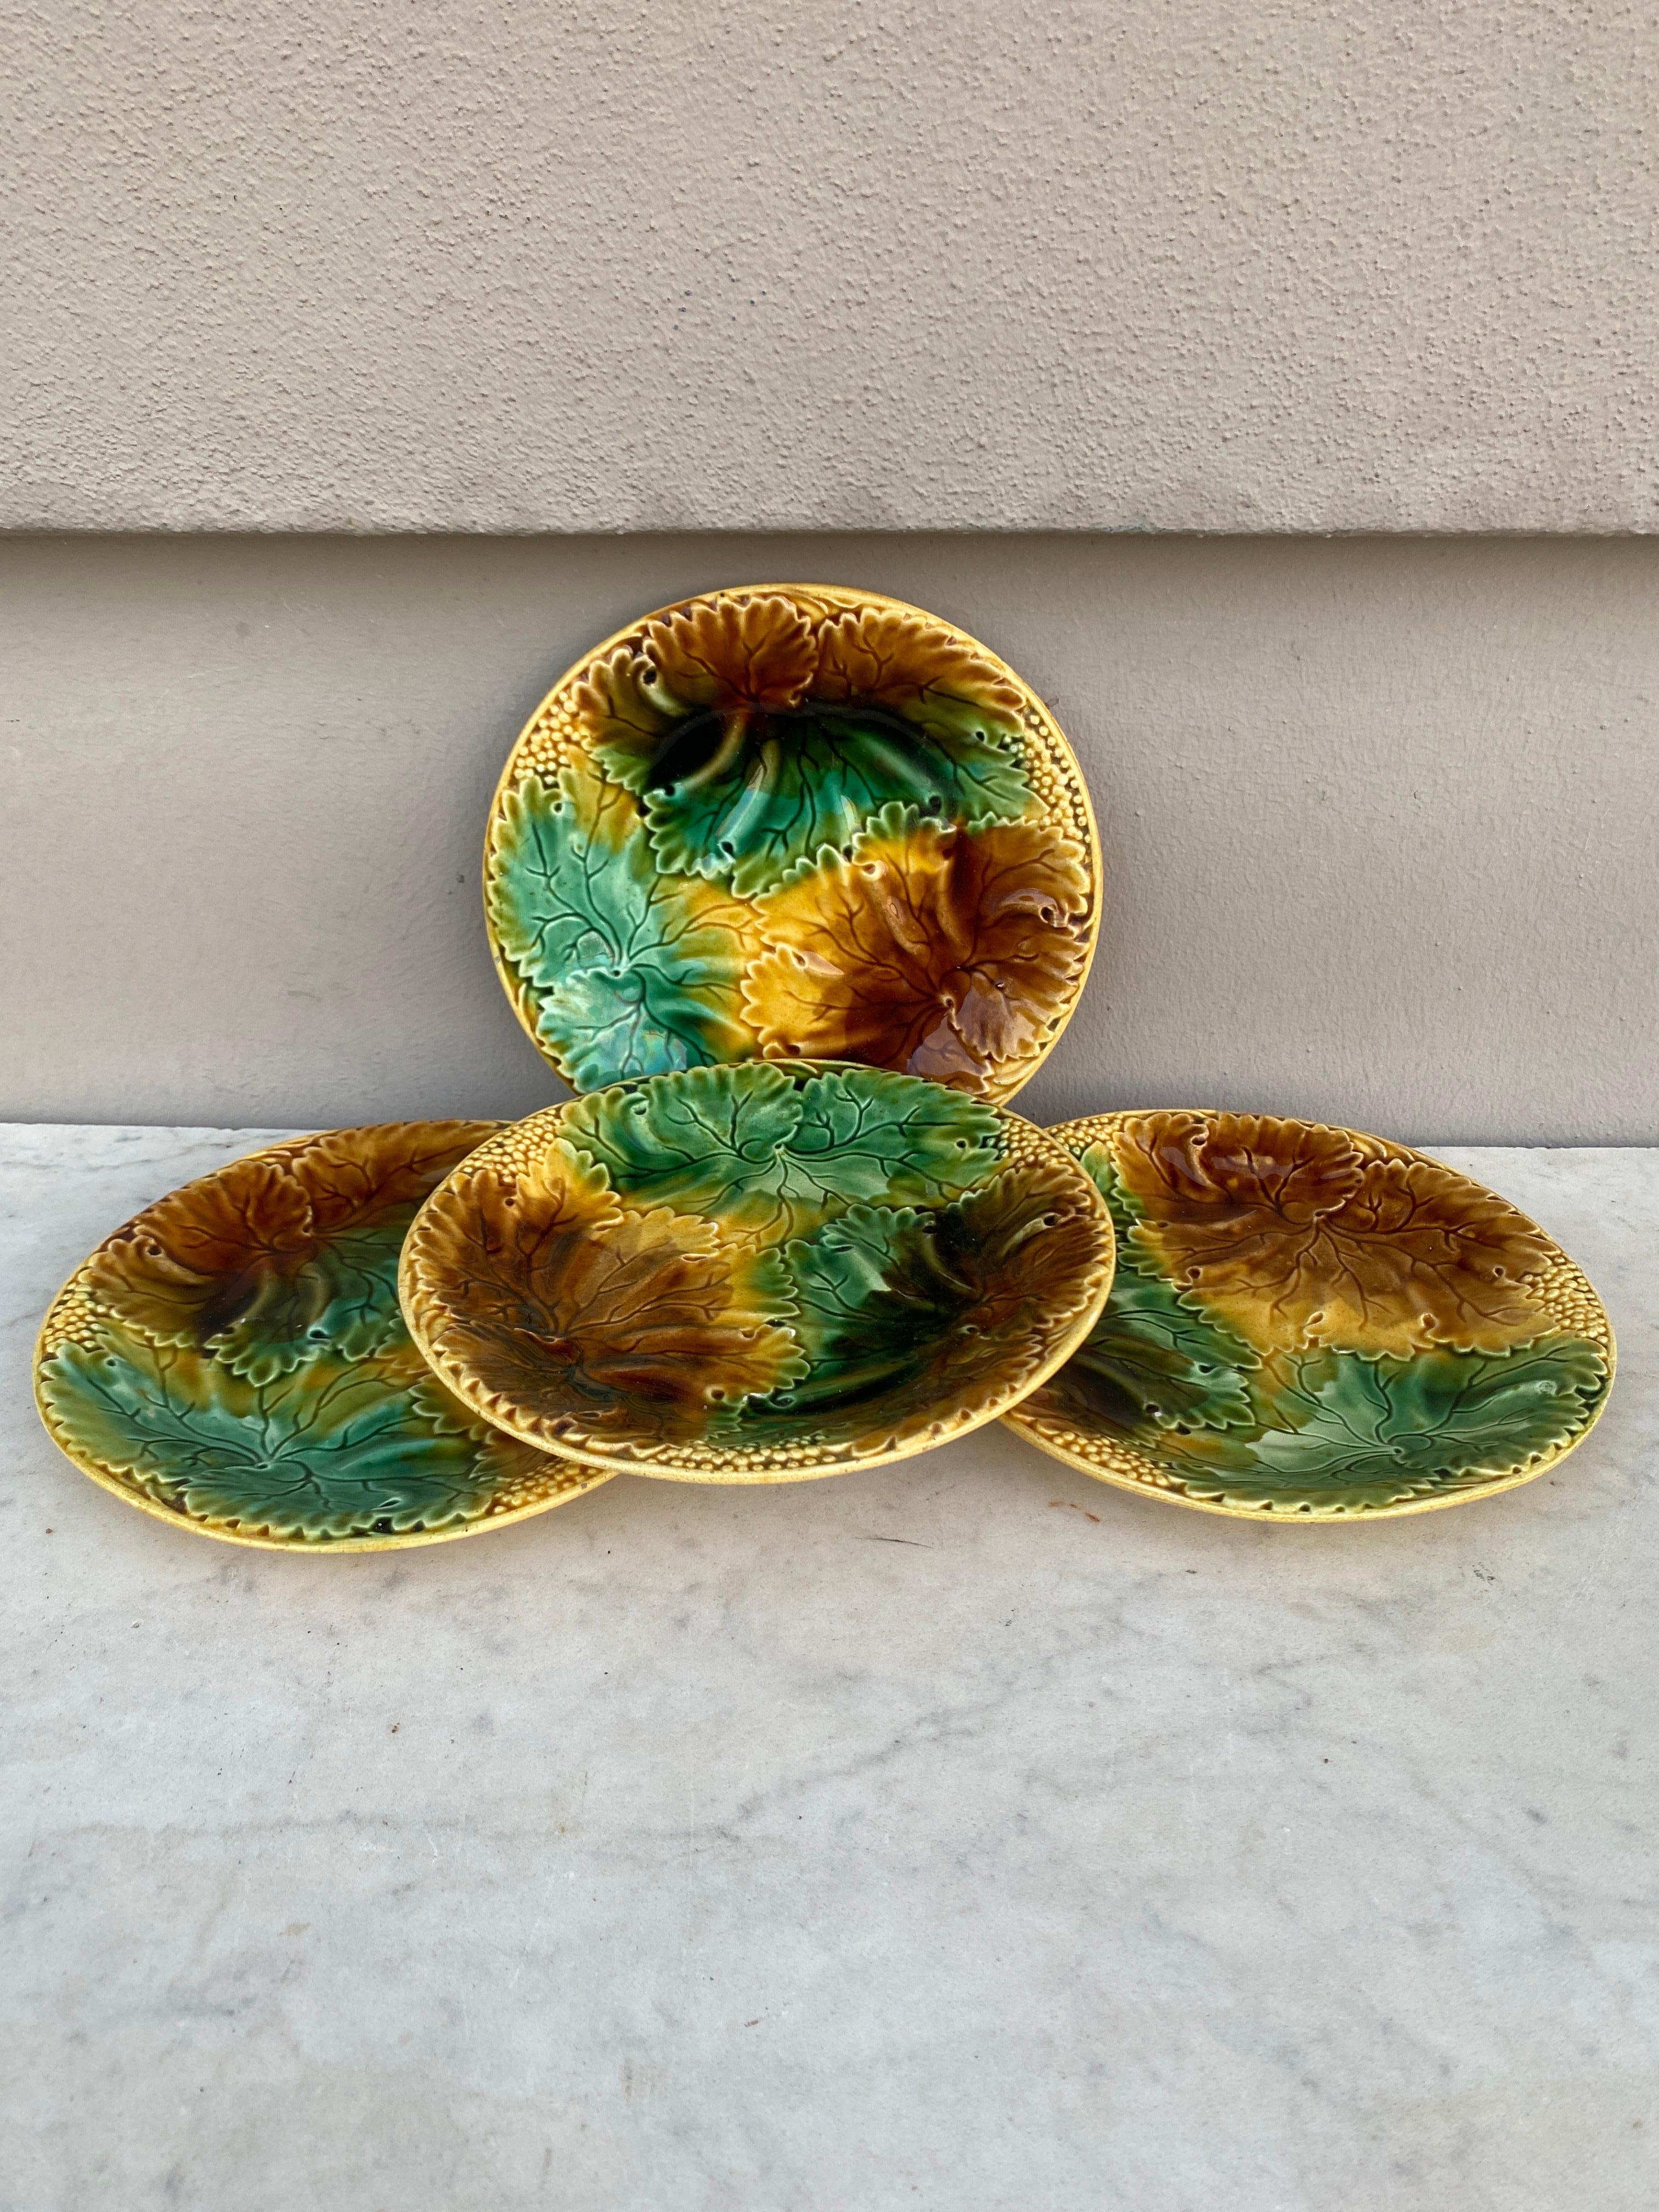 French Majolica leaves plates in green, brown and yellow, circa 1880.
4 plates available.